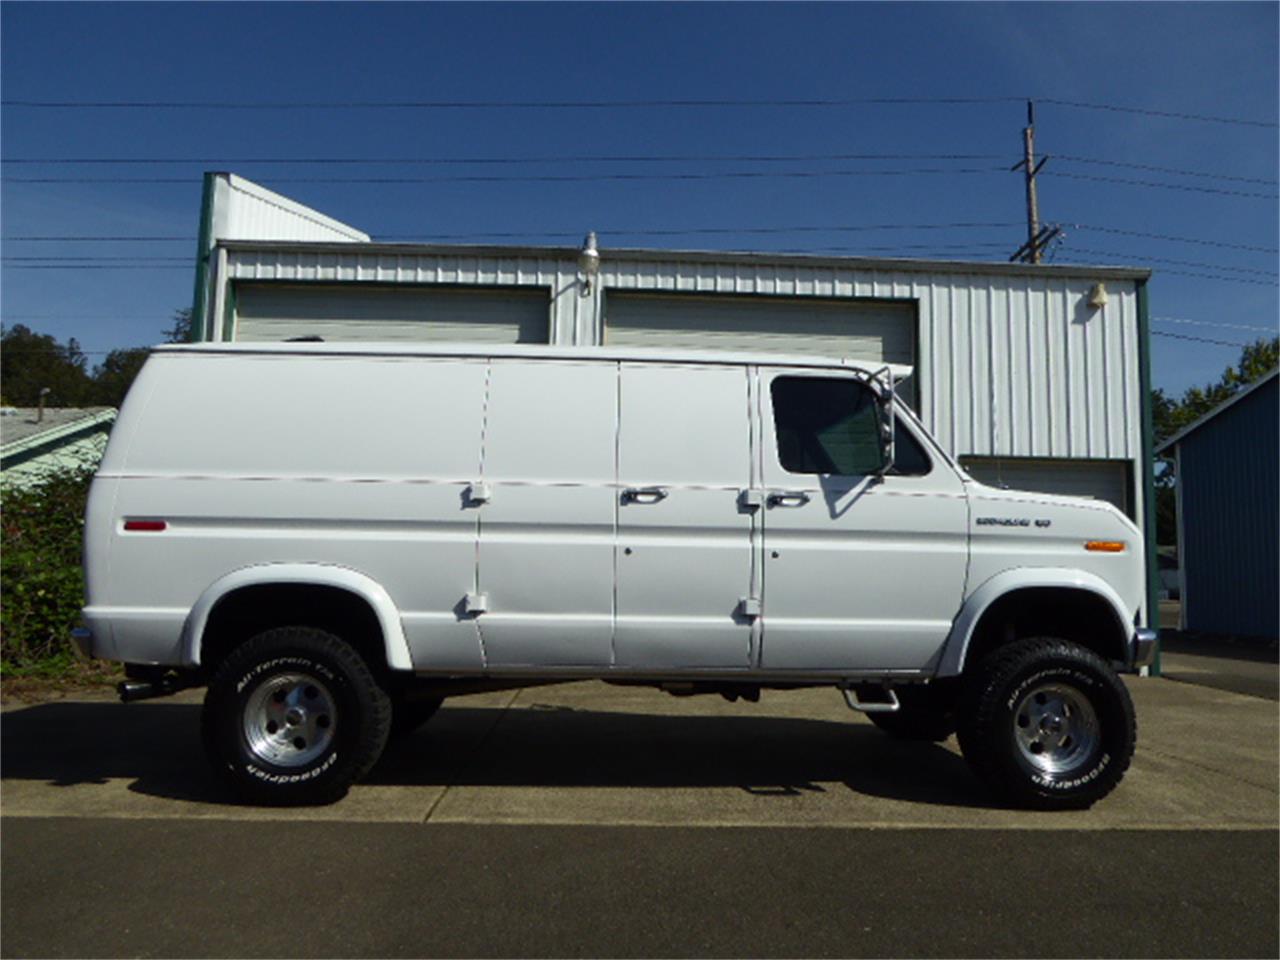 1990 ford van for sale